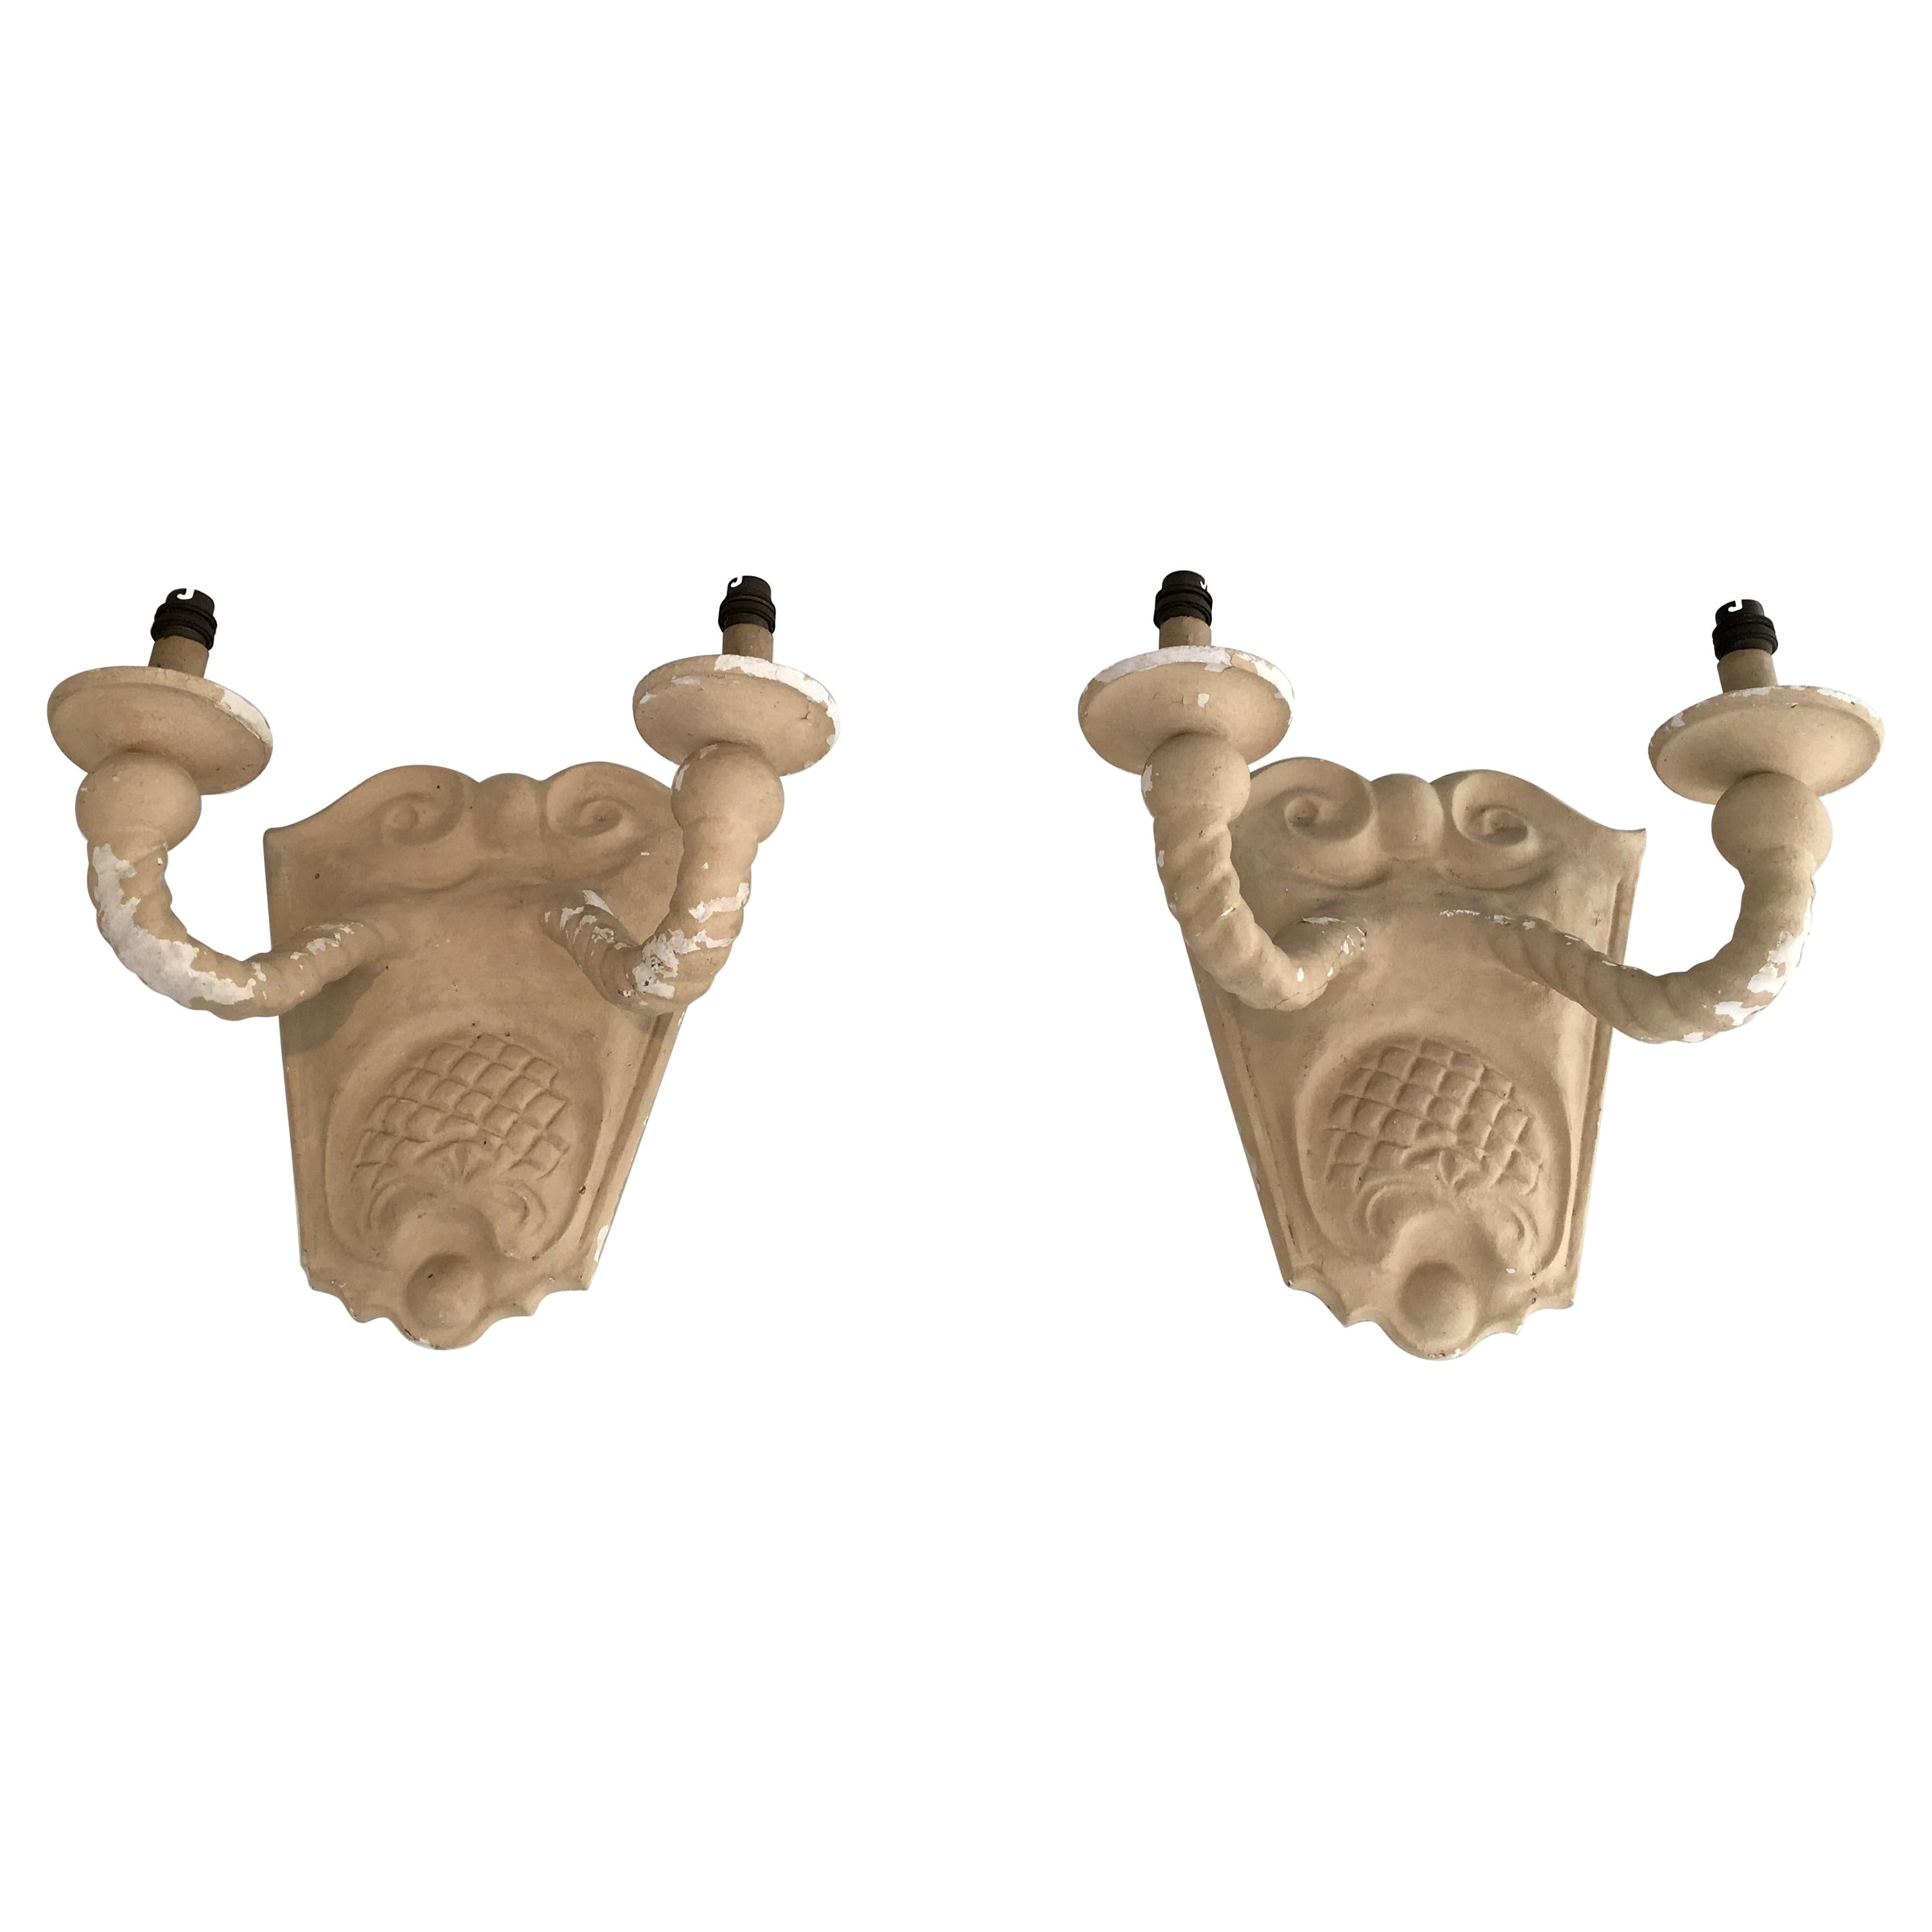 Pair of Plaster Wall Sconces, French, circa 1940